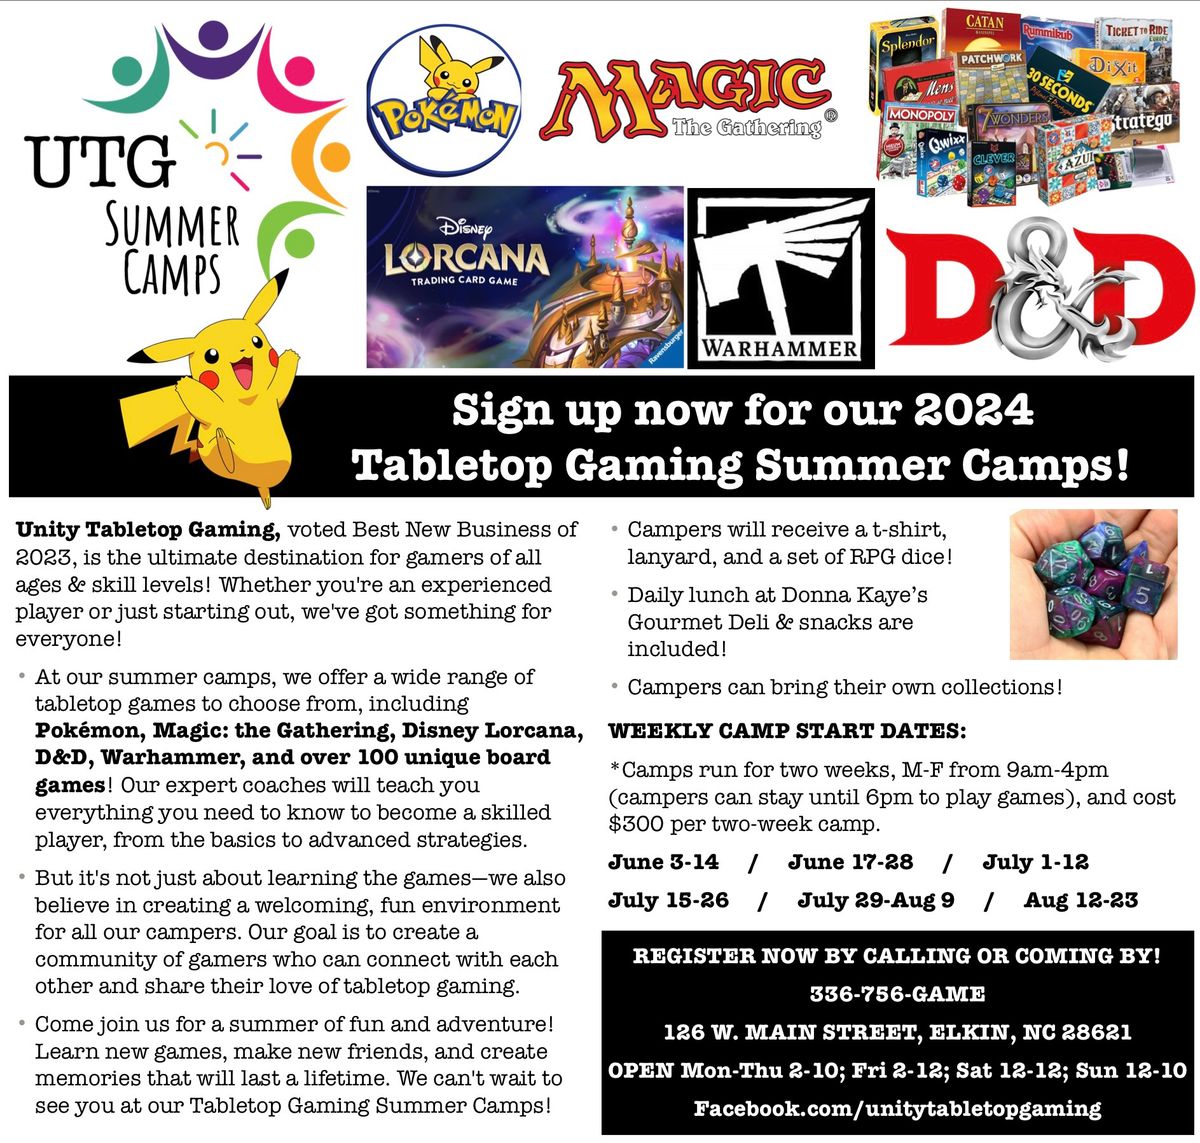 Tabletop Gaming Summer Camps!